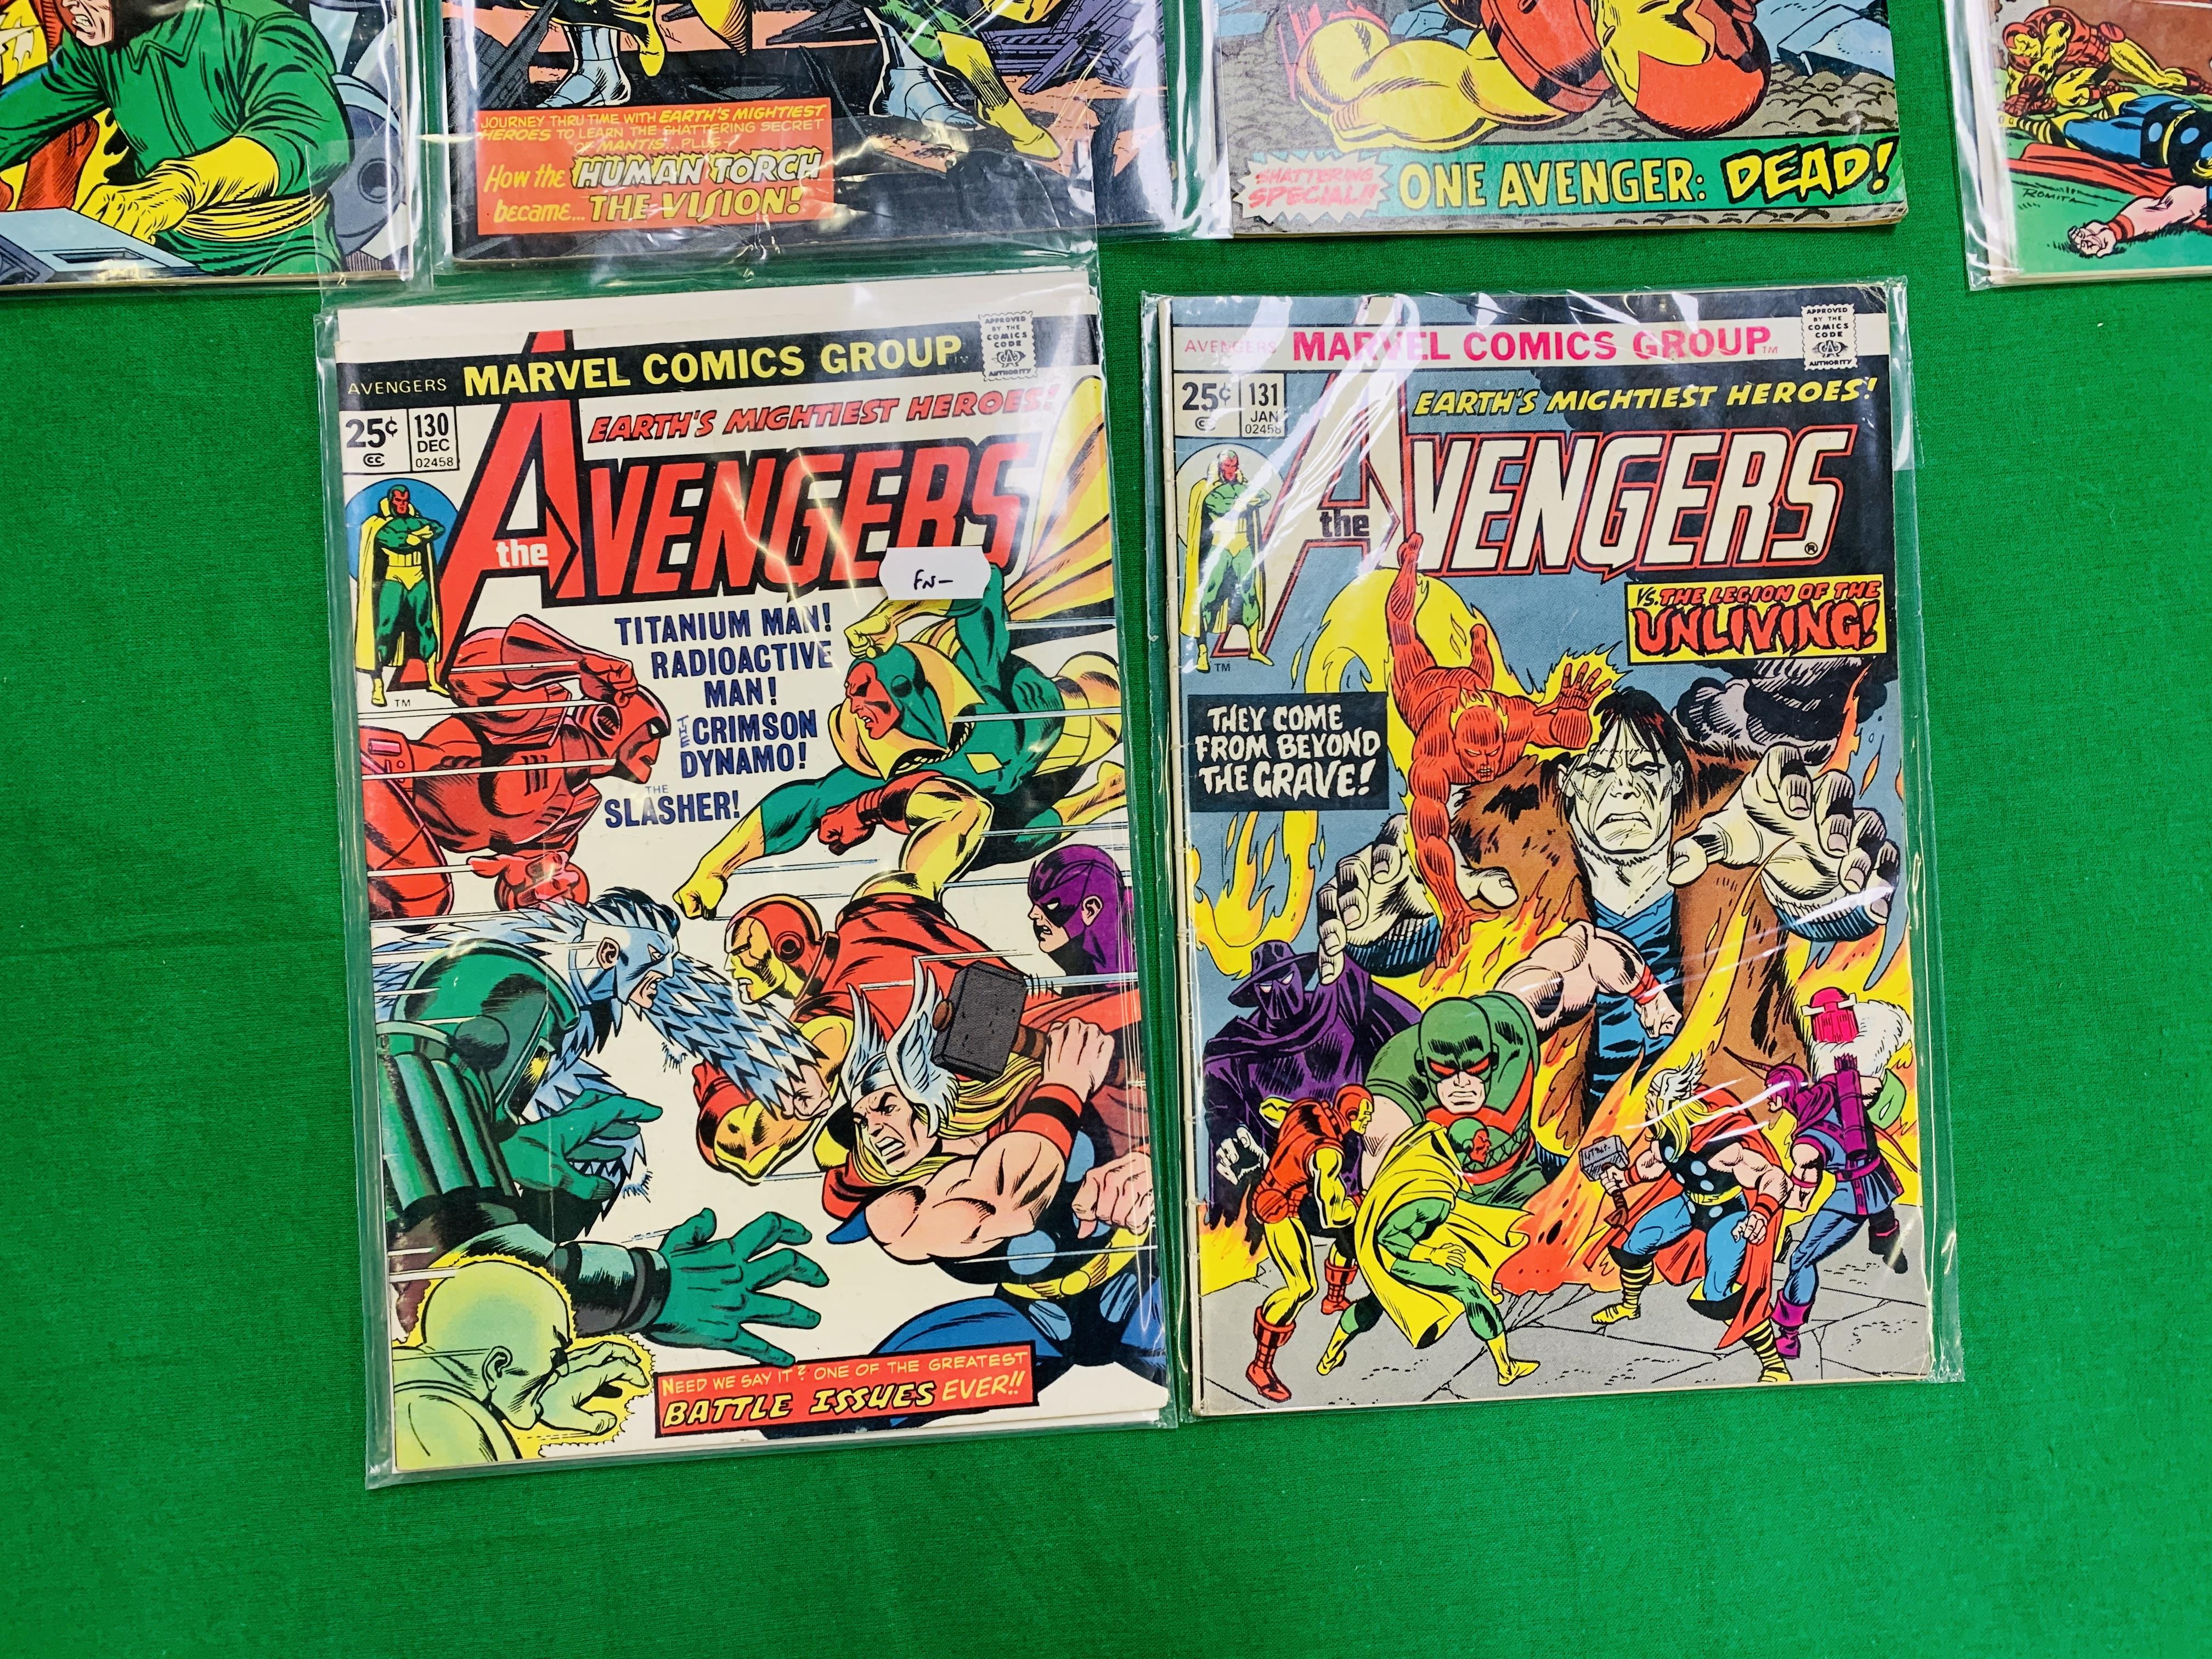 MARVEL COMICS THE AVENGERS NO. 101 - 299, MISSING ISSUES 103 AND 110. - Image 20 of 130